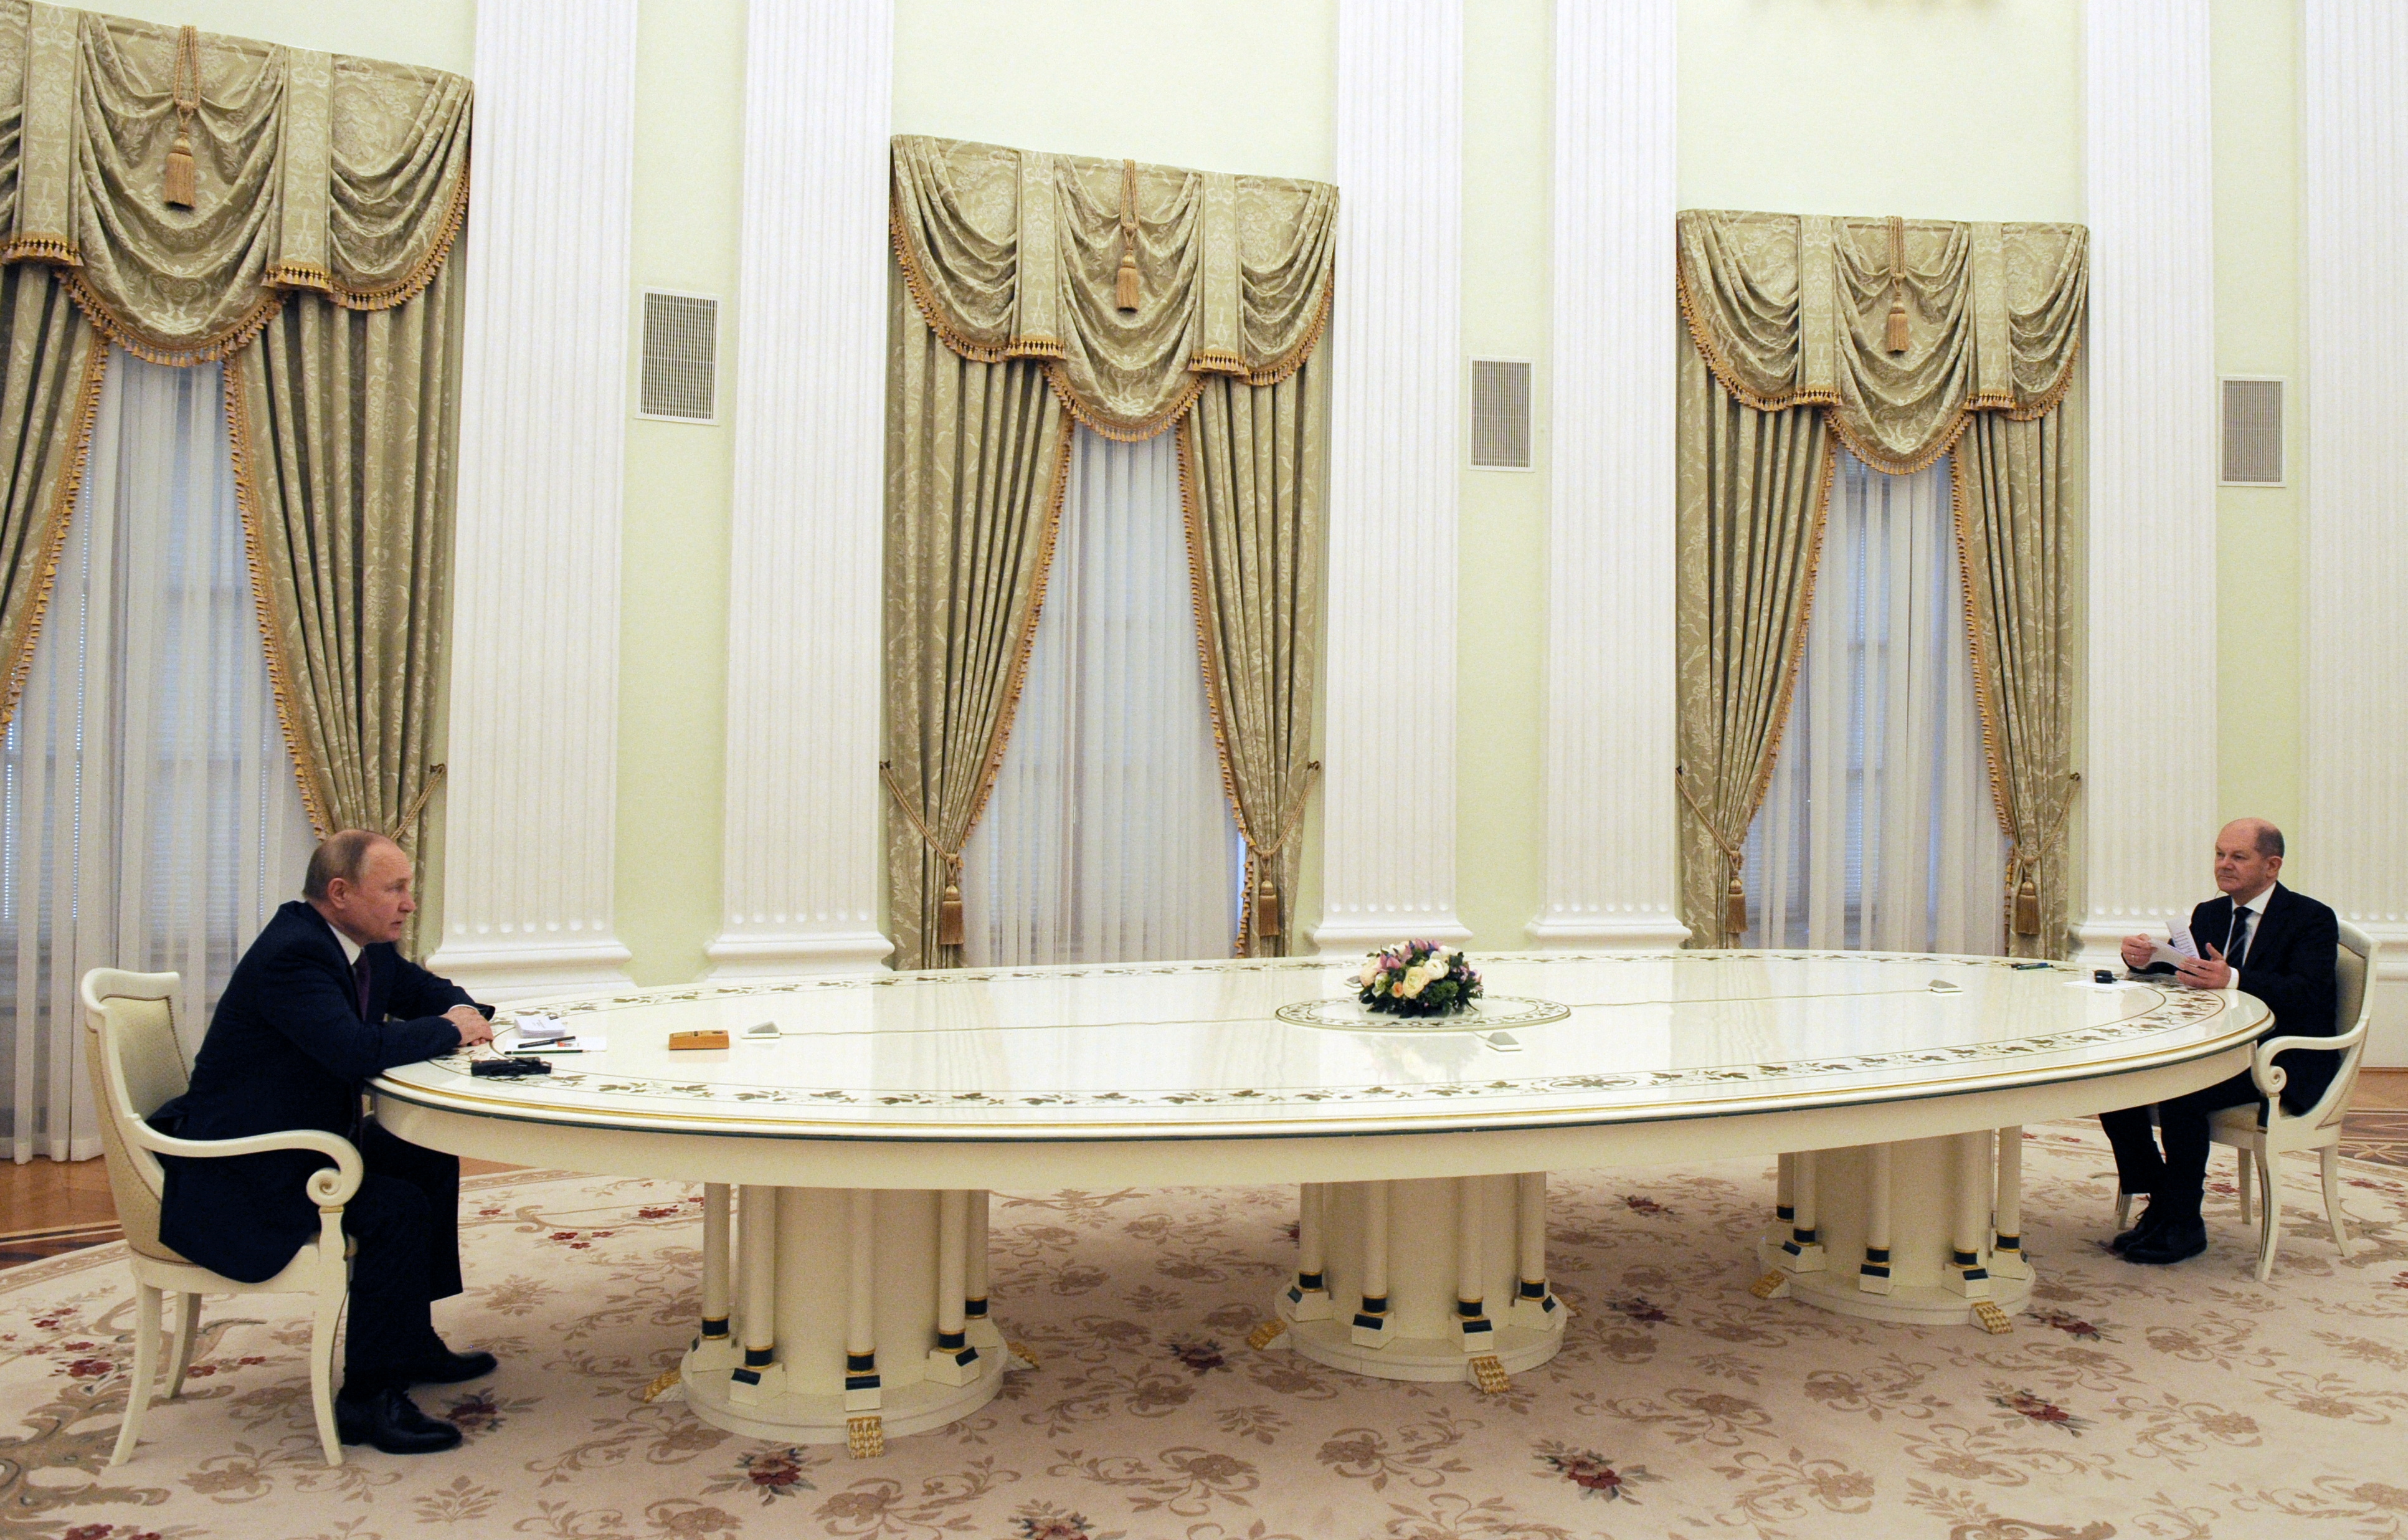 President Putin alone at the table of power